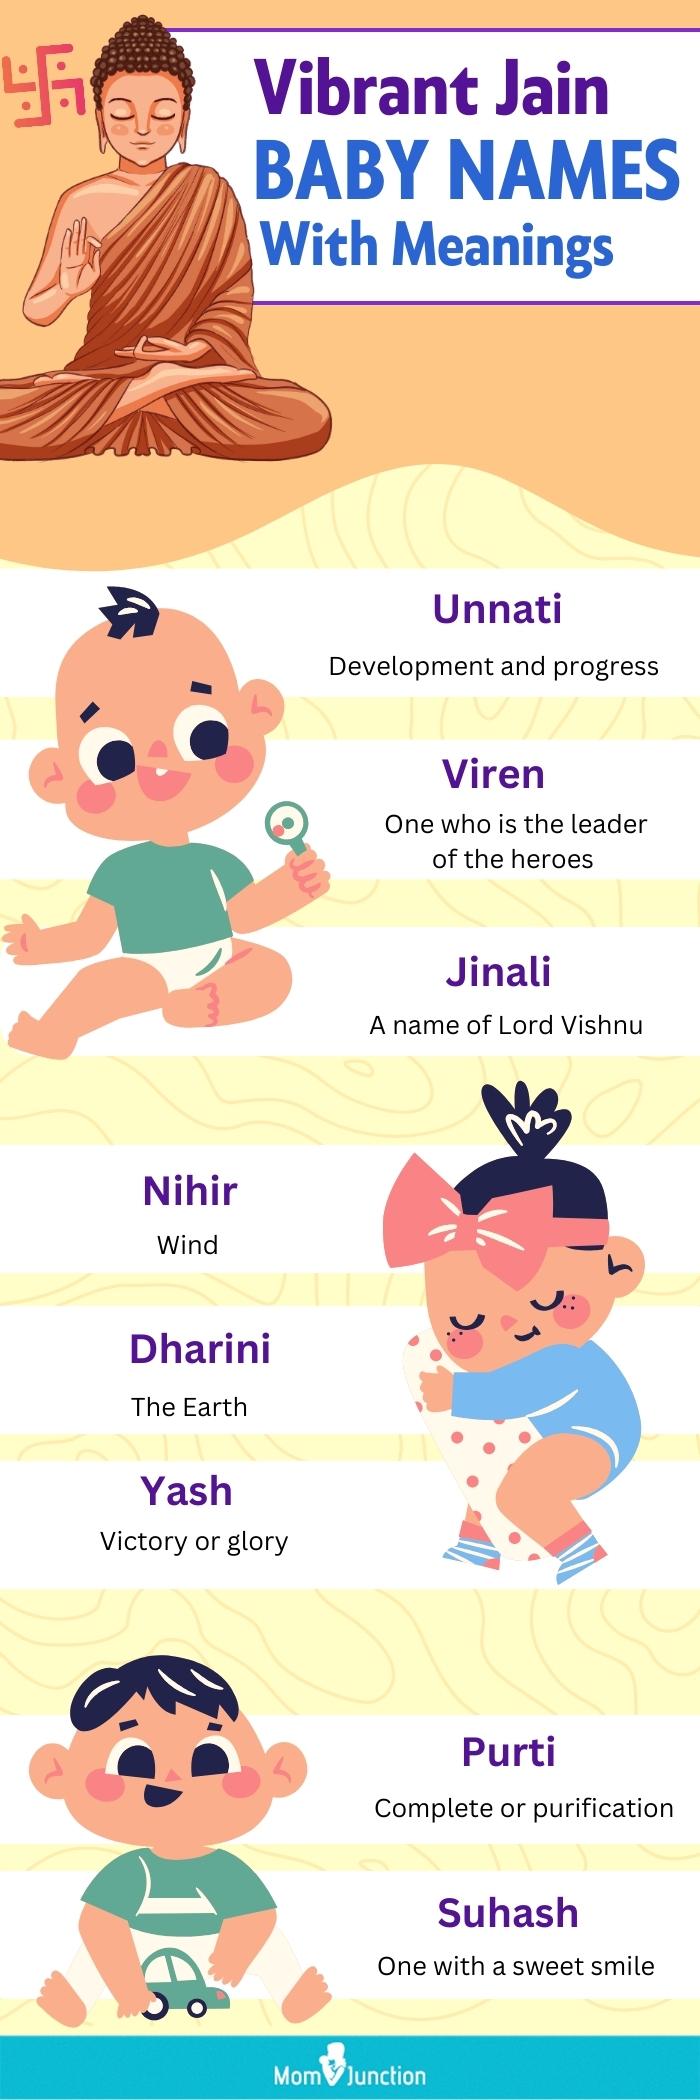 vibrant jainism baby names with meanings (infographic)